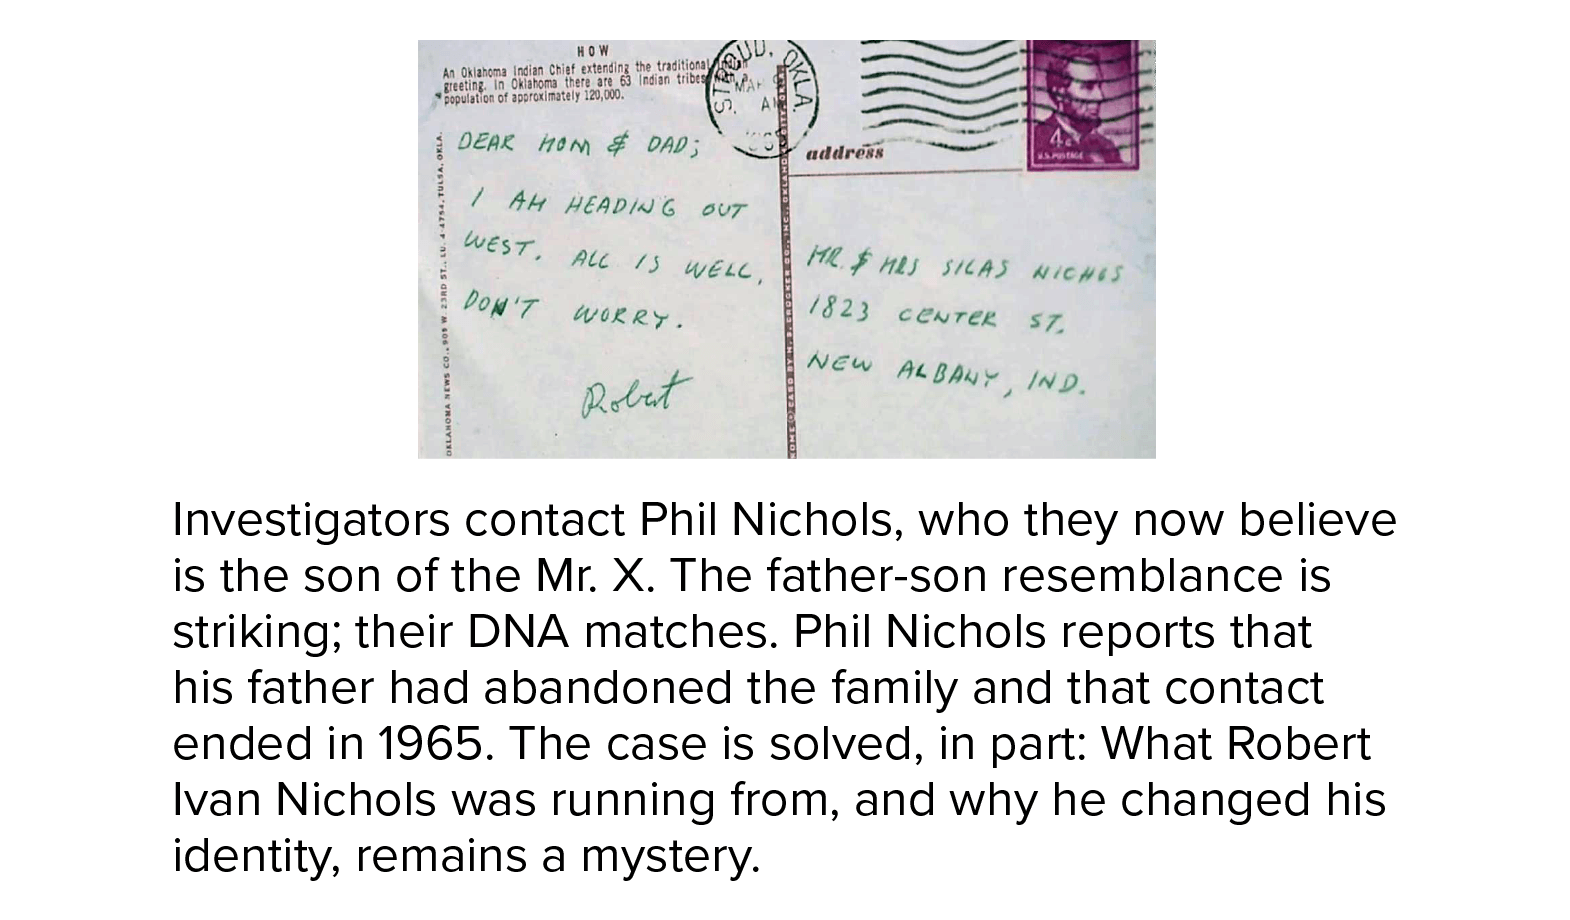 Investigators contact Phil Nichols, who they now believe is the son of the Mr. X. The father-son resemblance is striking; their DNA matches. Phil Nichols reports that his father had abandoned the family and that contact ended in 1965. The case is solved, in part: What Robert Ivan Nichols was running from, and why he changed his identity, remains a mystery.